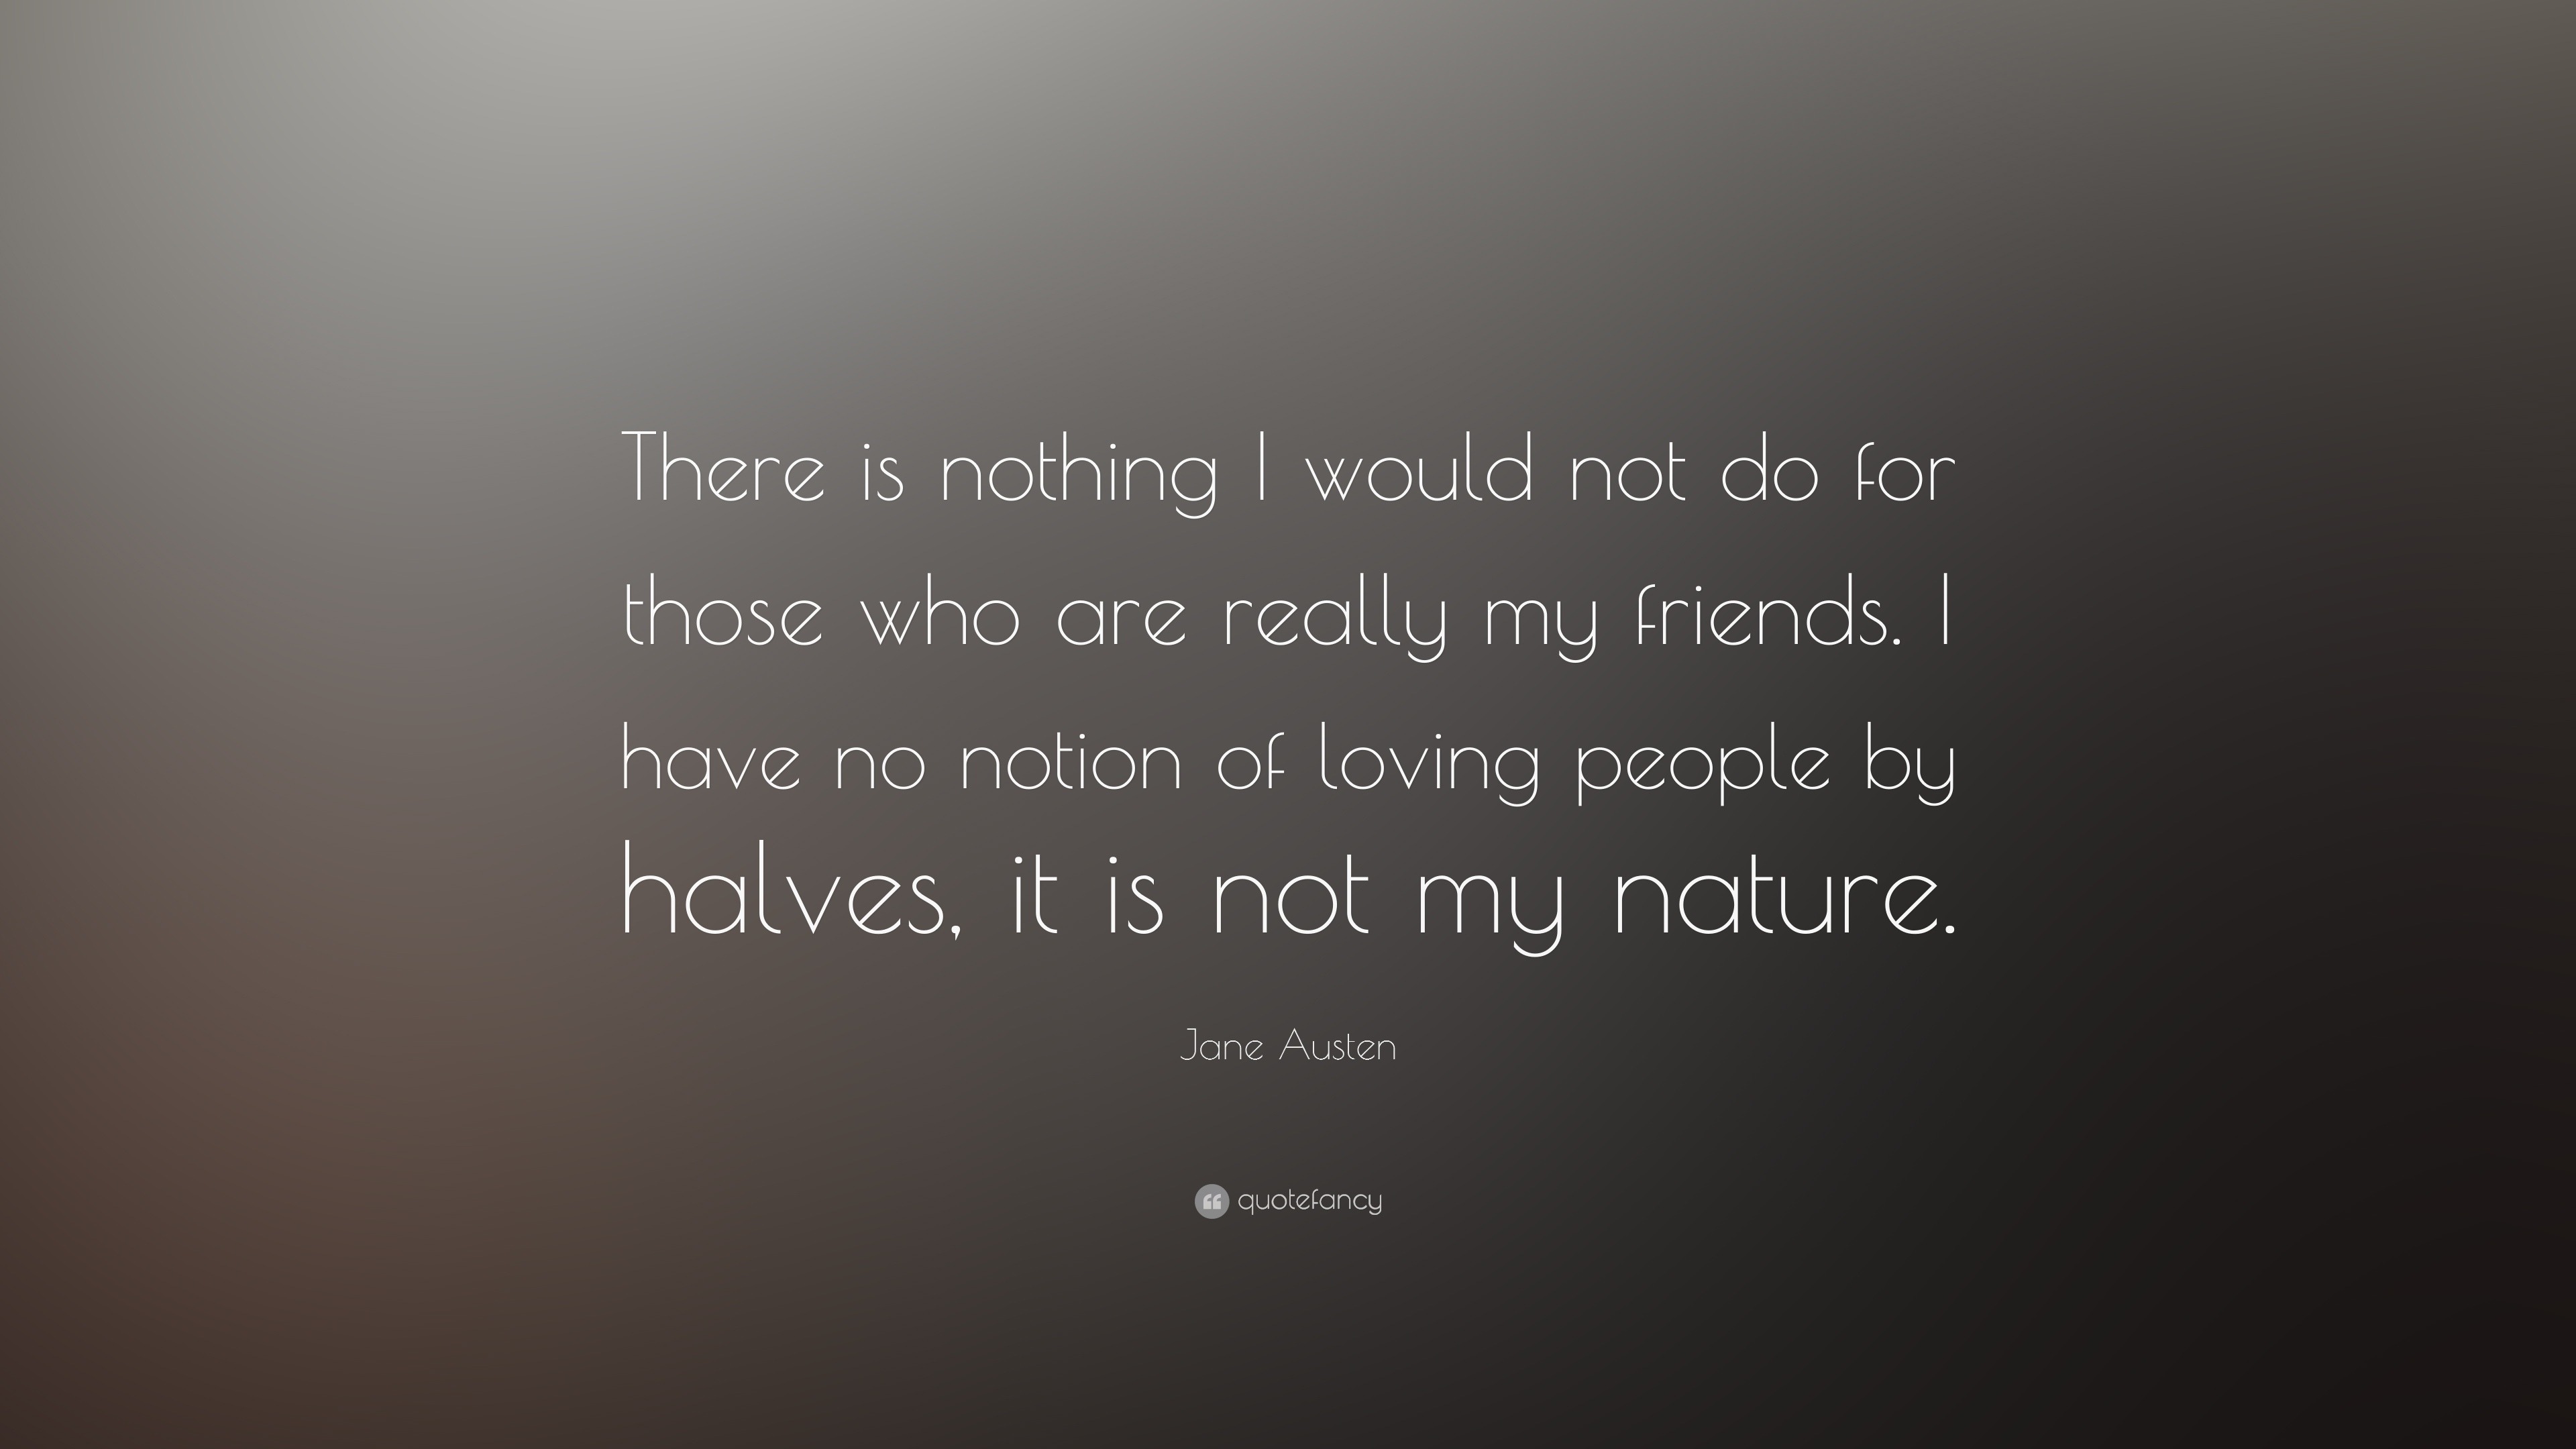 Jane Austen Quote “There is nothing I would not do for those who are